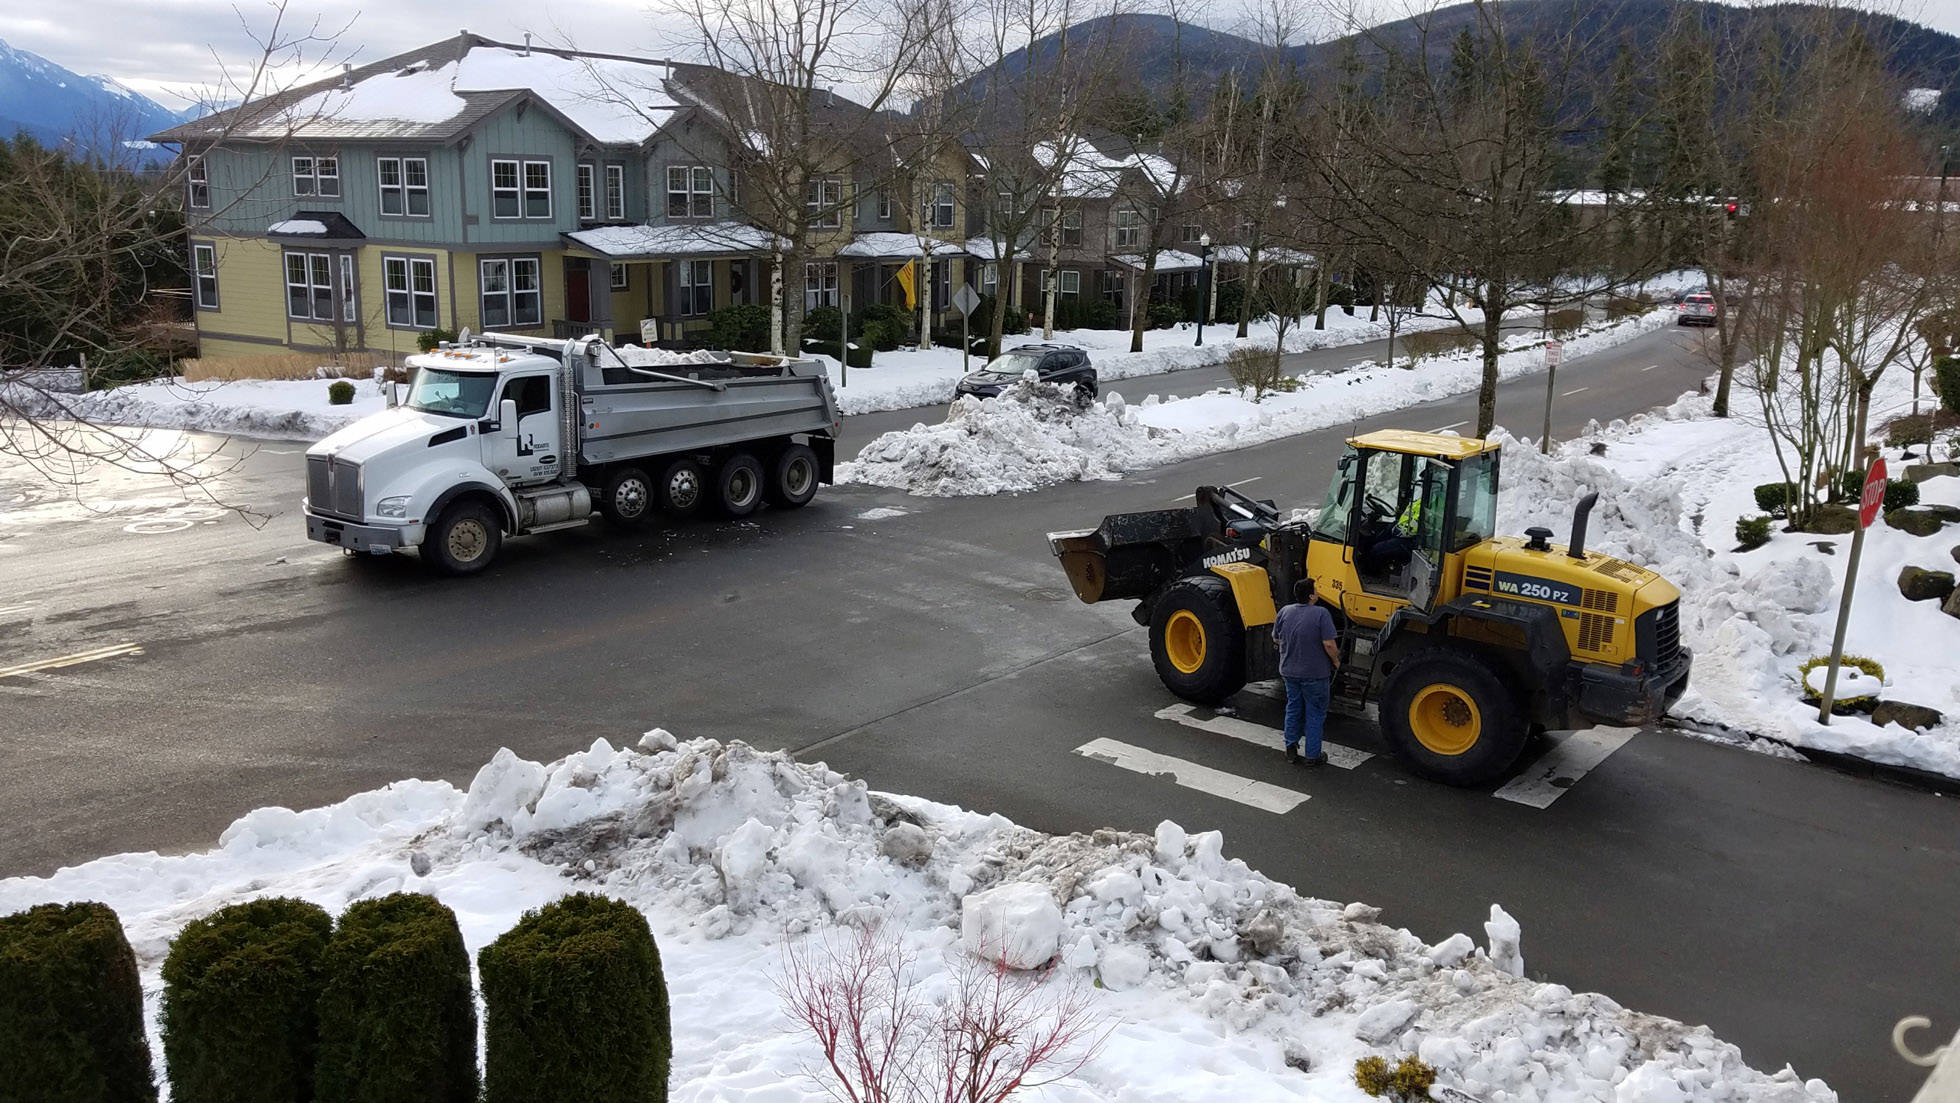 Snoqualmie crews worked all week to clear the roads and neighborhoods, restoring access throughout the city. Courtesy photo